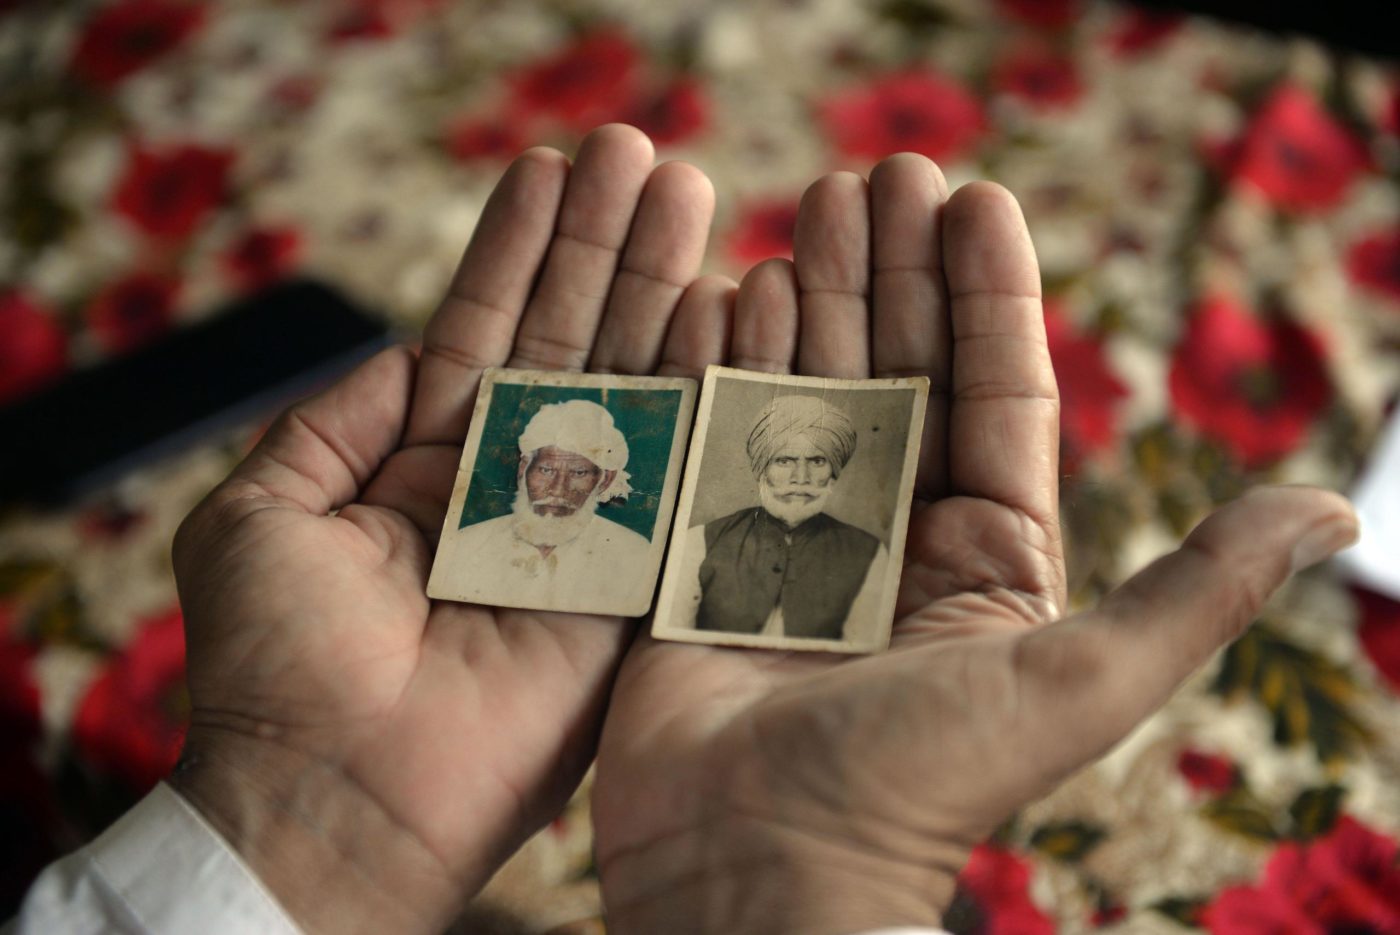 05 August 2022, Pakistan, Faisalabad: Shahbaz Khan shows pictures of his uncle Inayat Khan (left), who was also separated from the family at the time of partition and died in India a few years ago, and his late father Sharif Khan. They are the brothers of